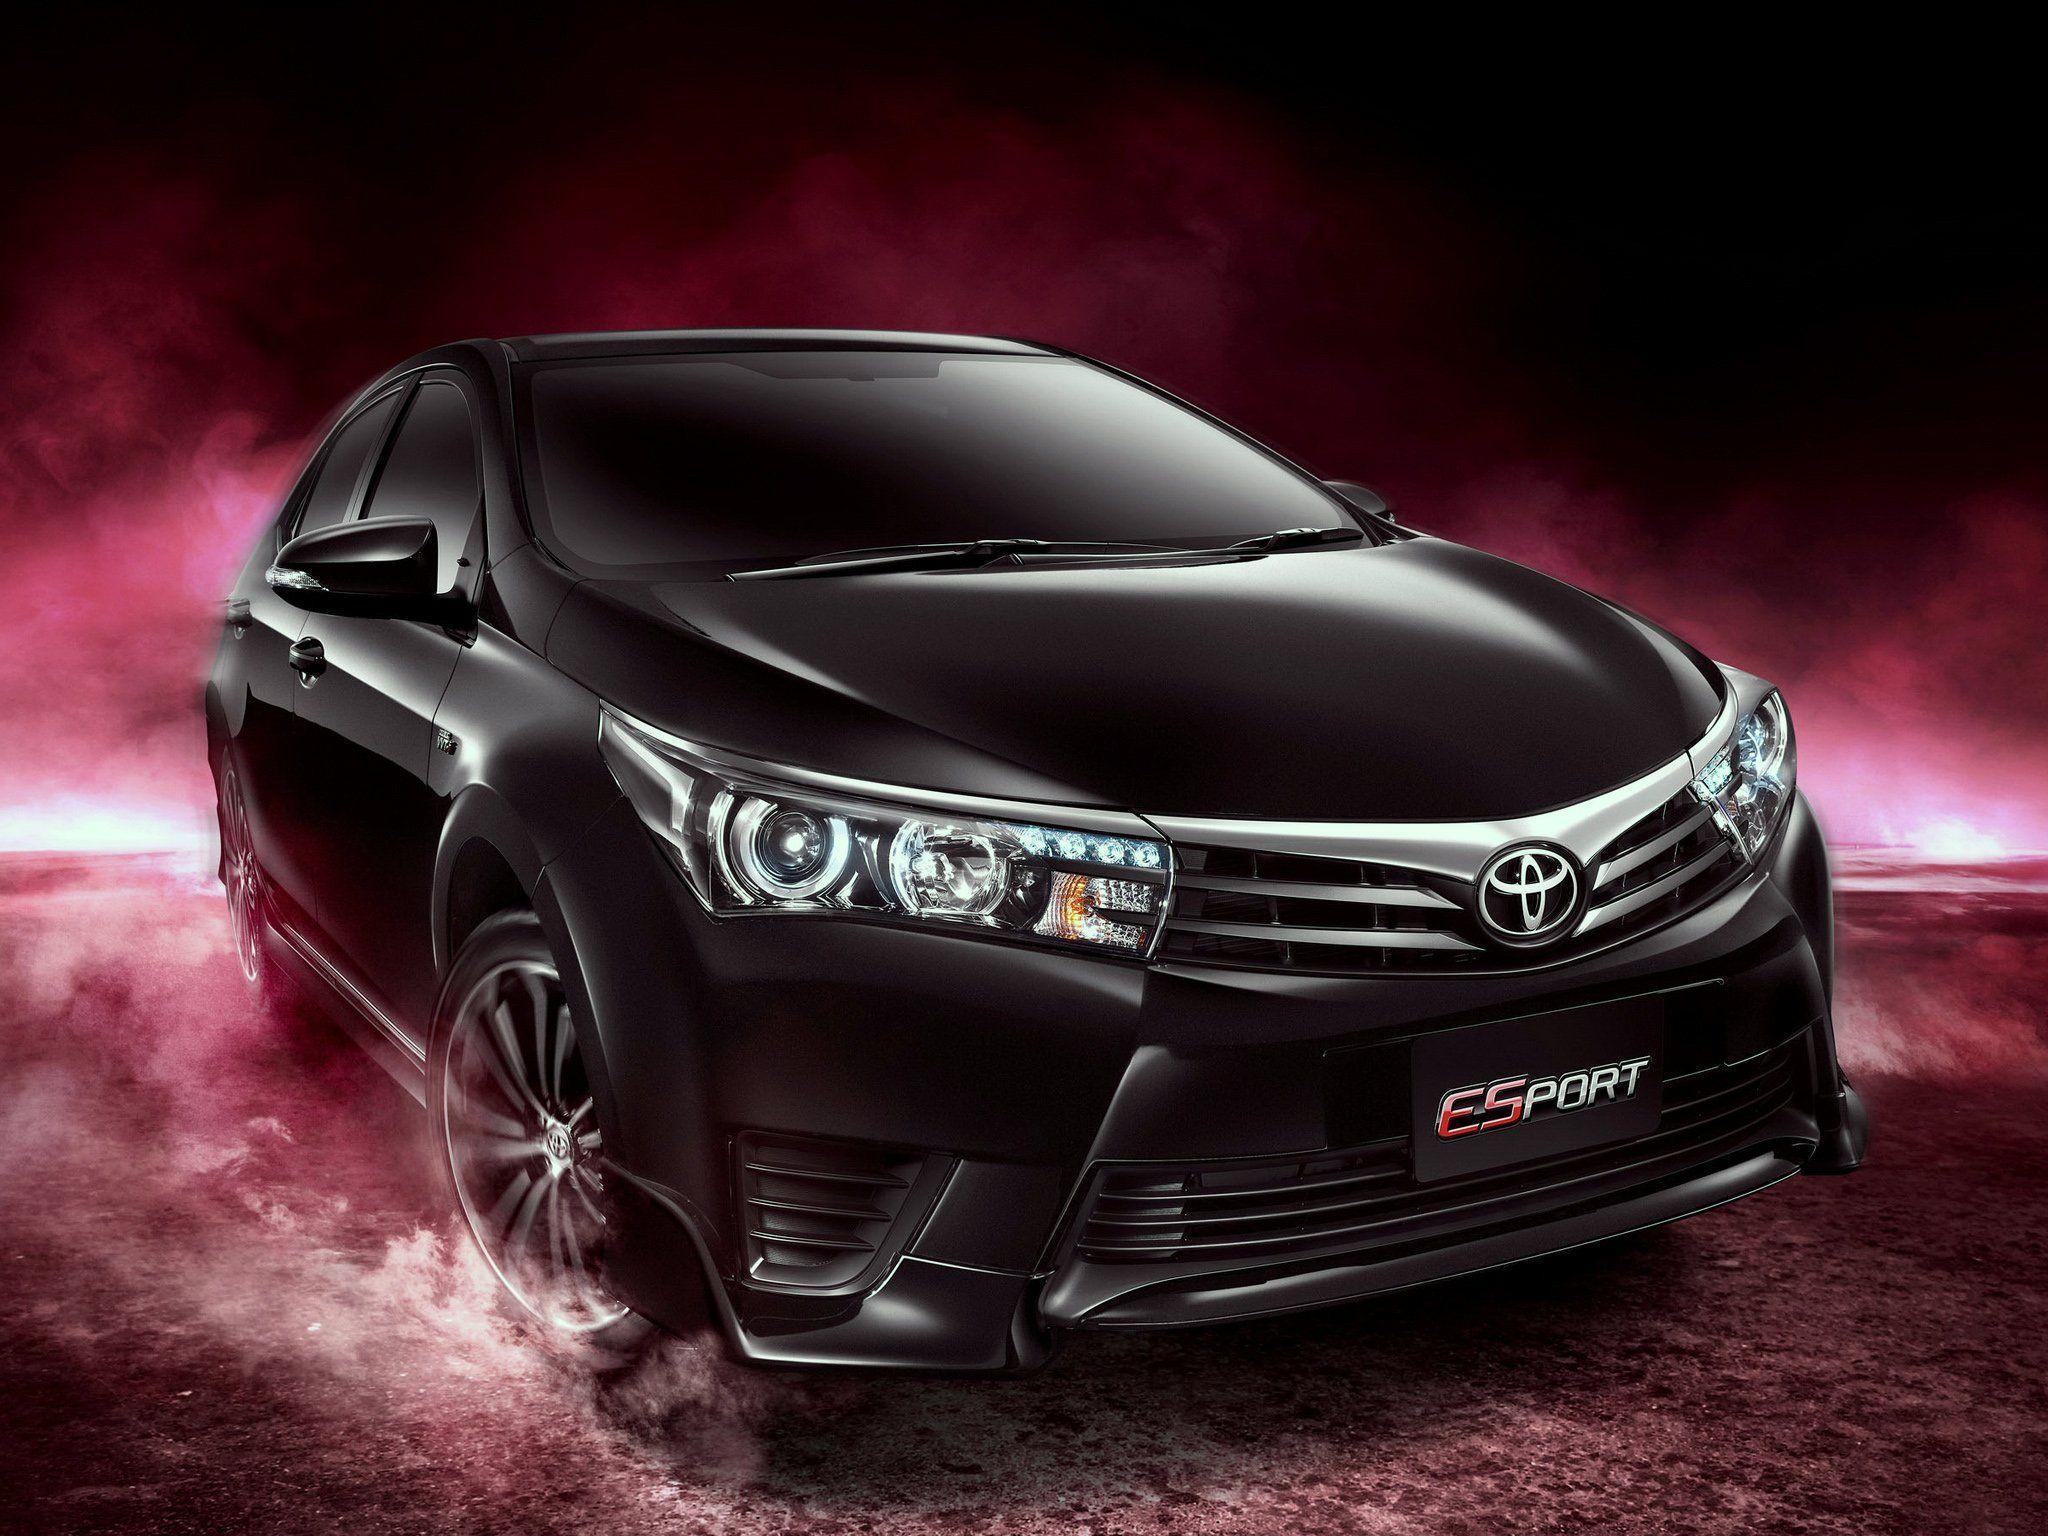 Awesome Toyota Corolla Gr Sport 2019 4K Pictures
